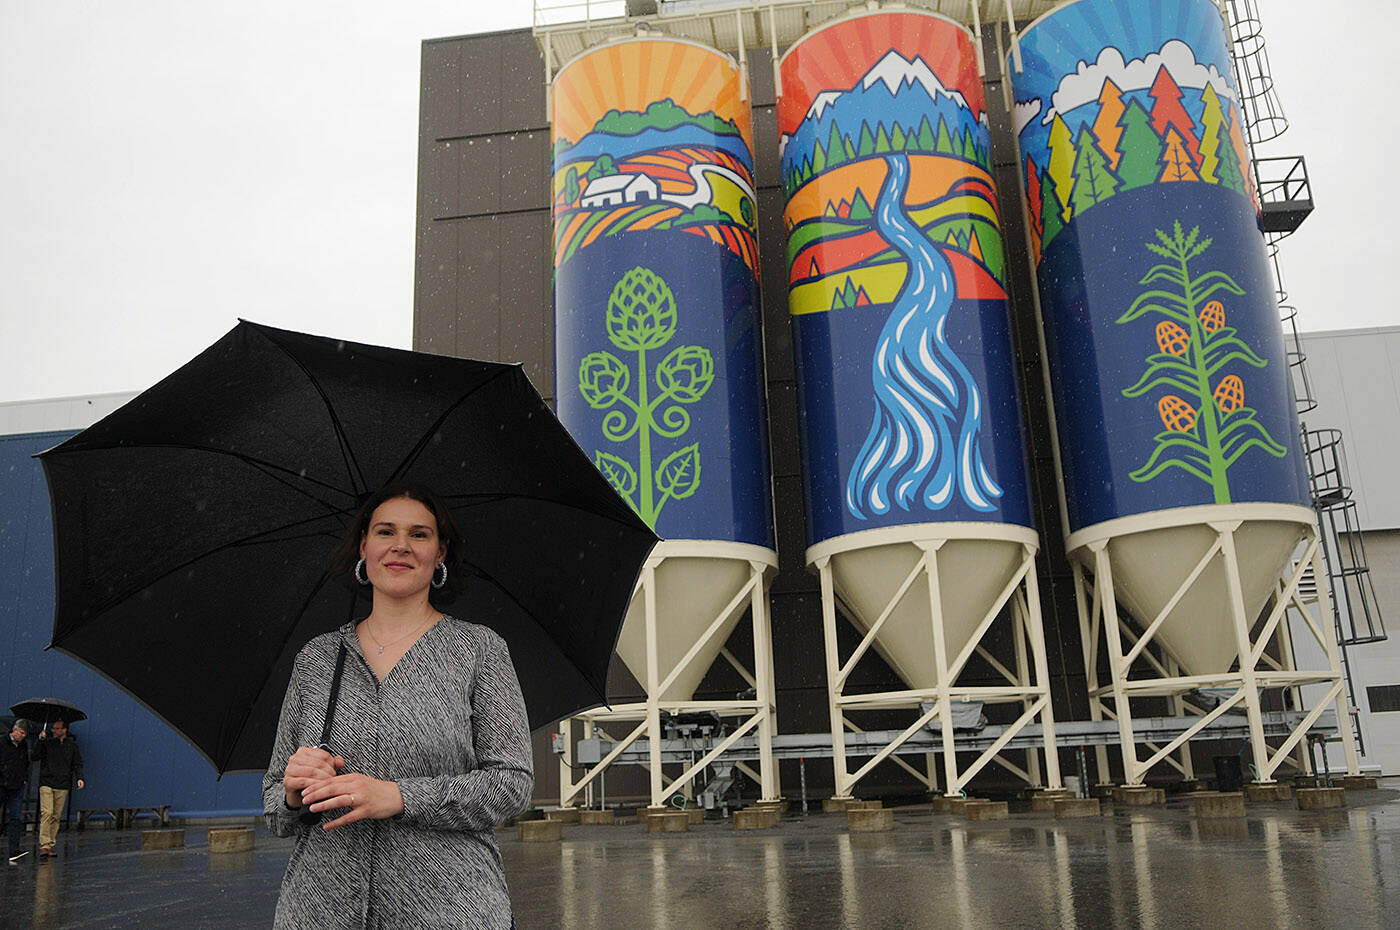 Chilliwack artist Silvana Kulyk stands in front of her public art piece Gifts of Nature which was installed on silos outside the Molson Coors Fraser Valley Brewery and unveiled on Thursday, June 9, 2022. (Jenna Hauck/ Chilliwack Progress)